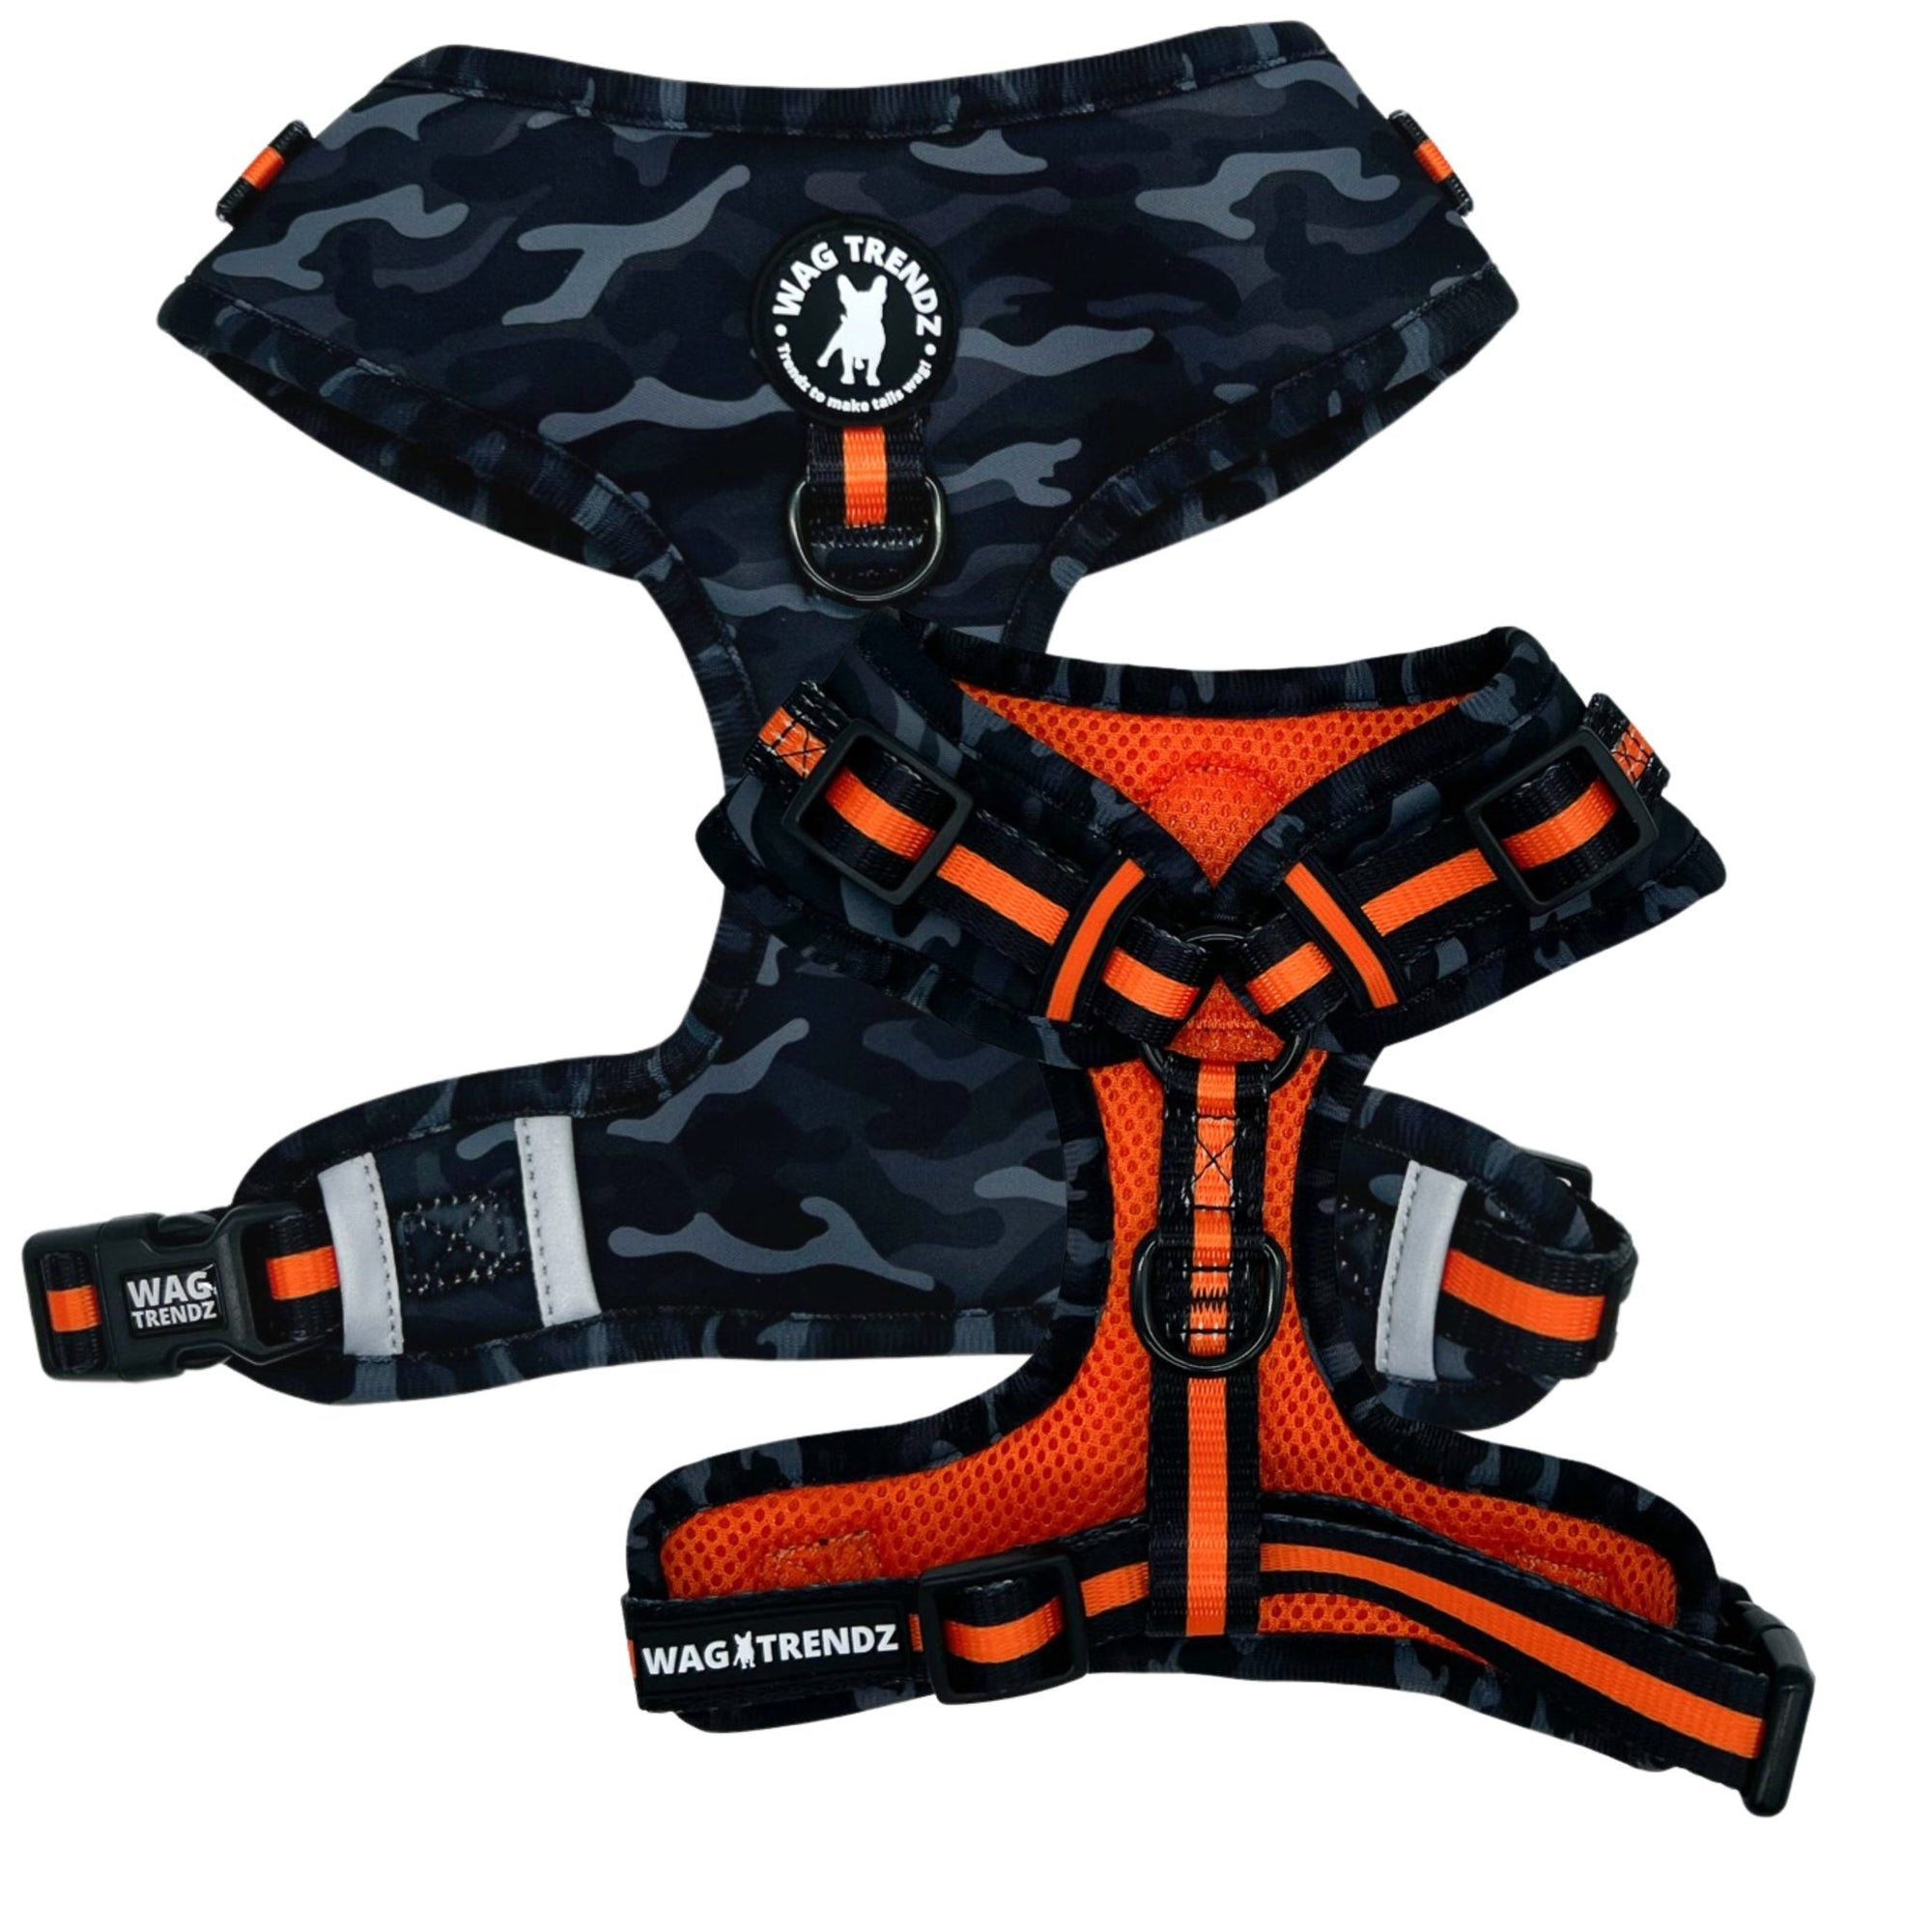 No Pull Dog Harness - black and gray camo dog adjustable harness with front clip and orange accents - front &amp; back view - Wag Trendz